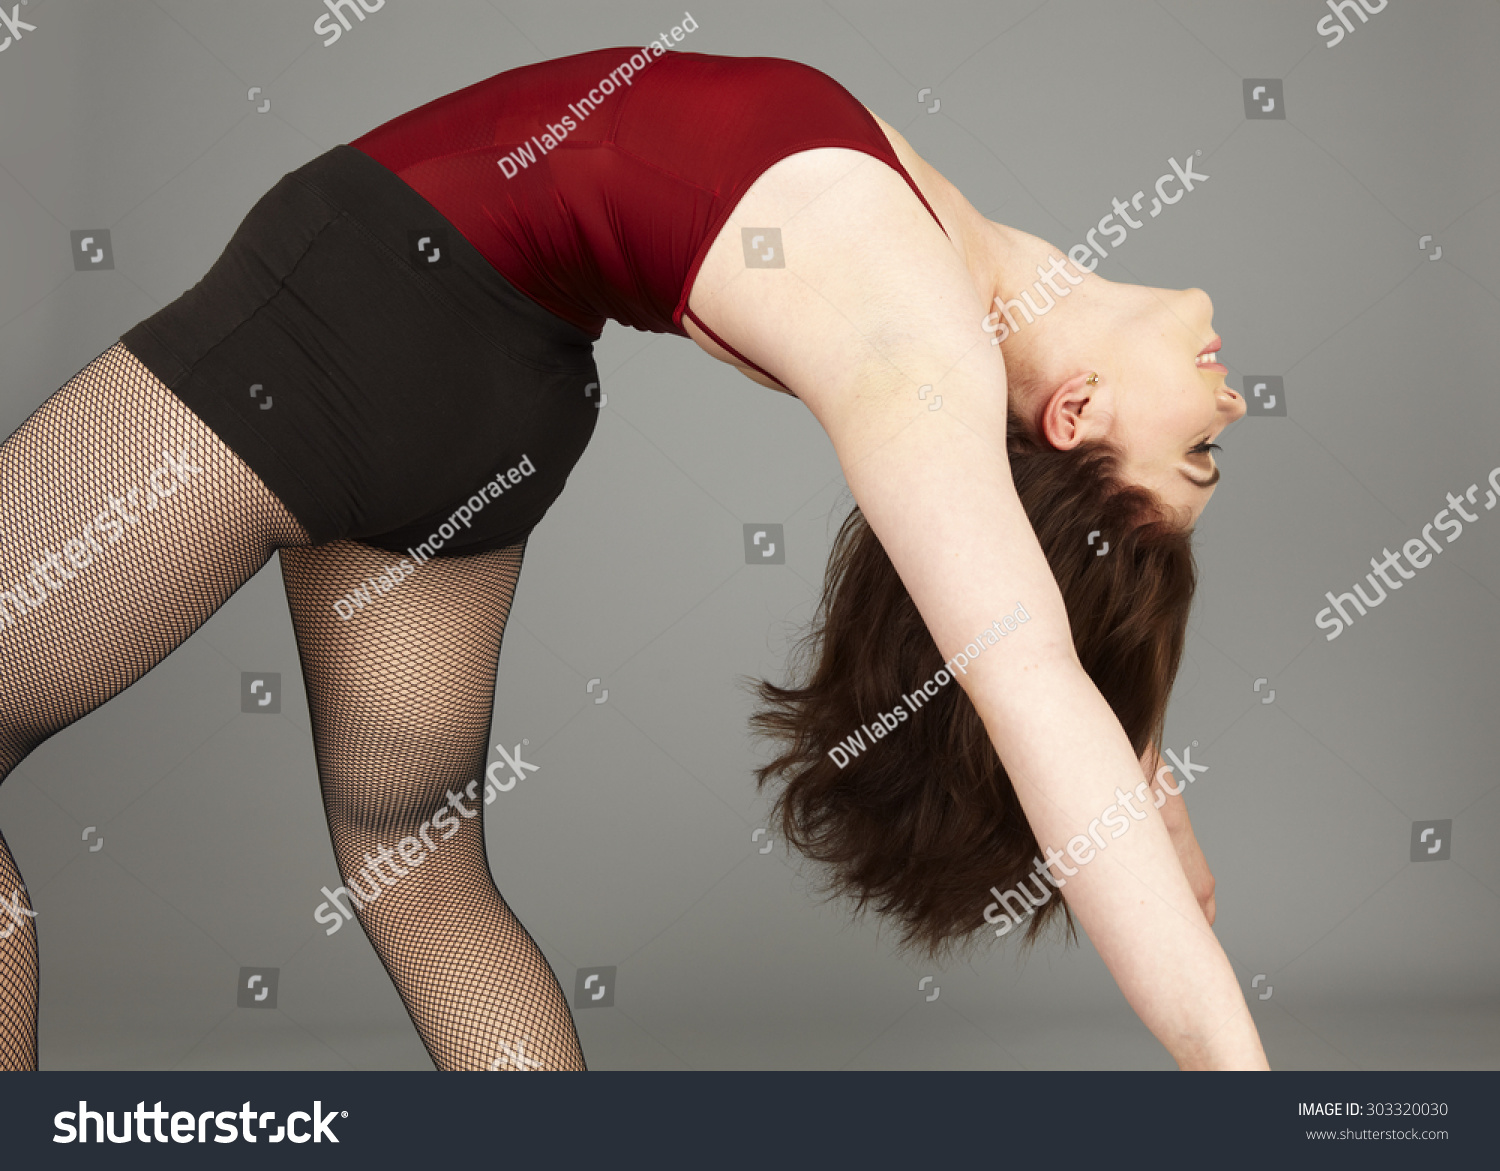 Find Dancer Bending Over Backwards stock images in HD and millions of other...